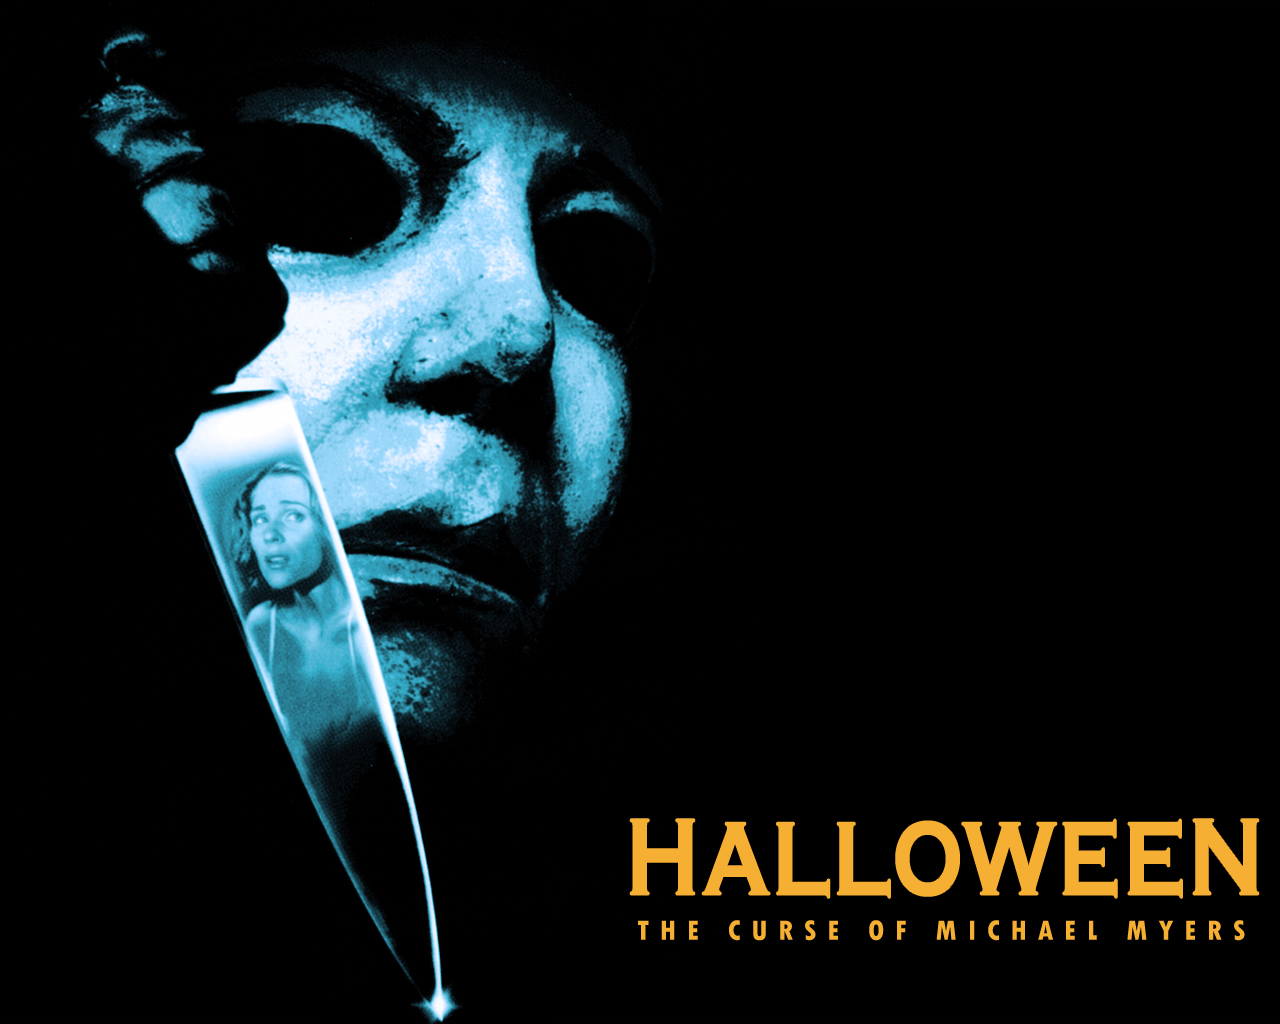 High Resolution Wallpaper | Halloween: The Curse Of Michael Myers 1280x1024 px